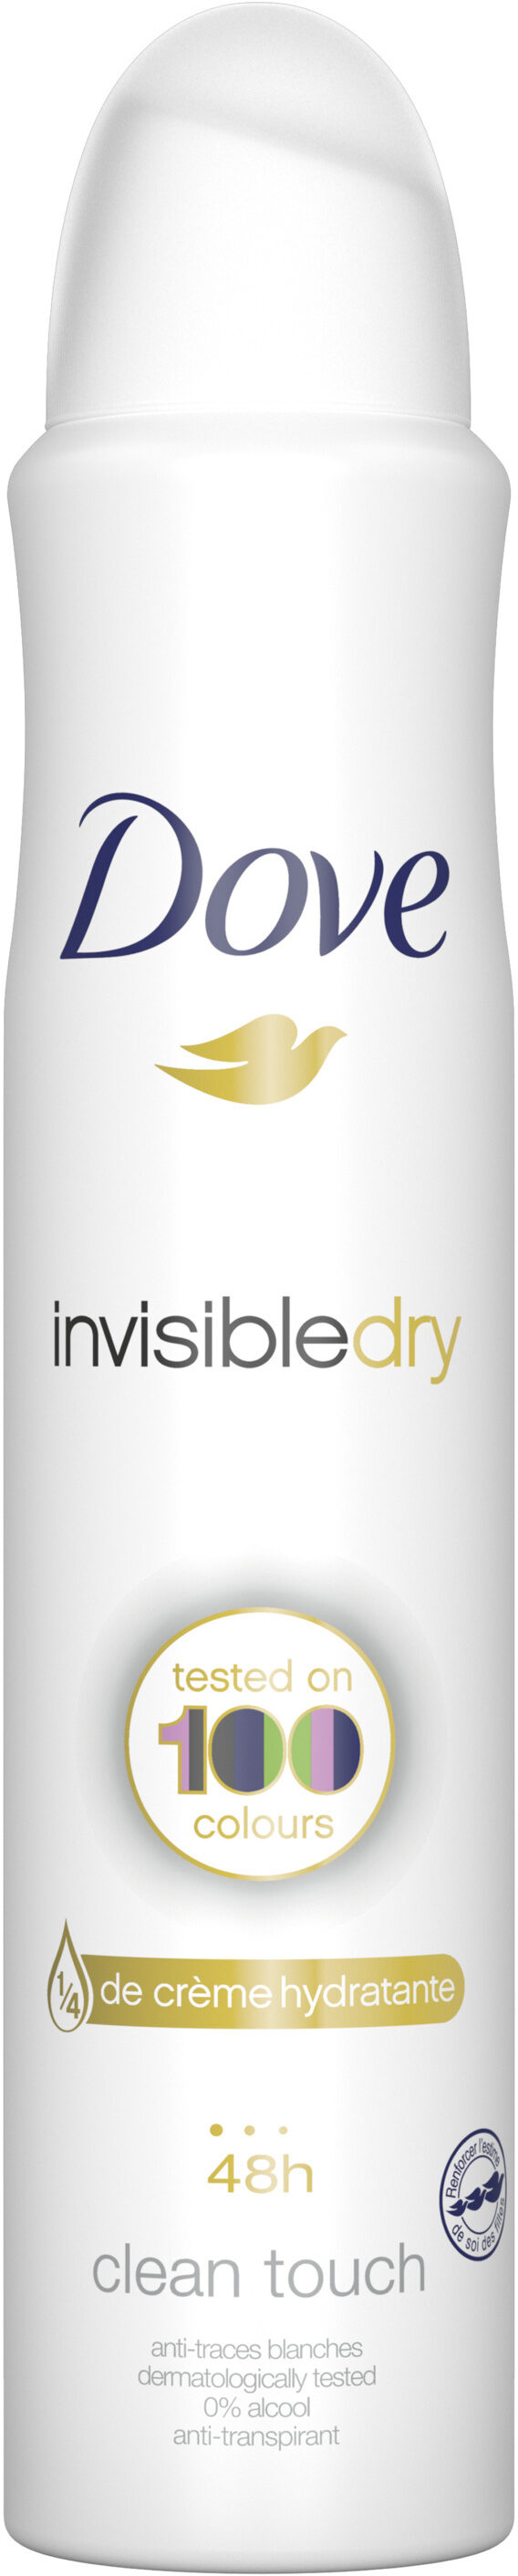 Dove Anti-Transpirant Femme Spray Invisible Dry - Product - fr